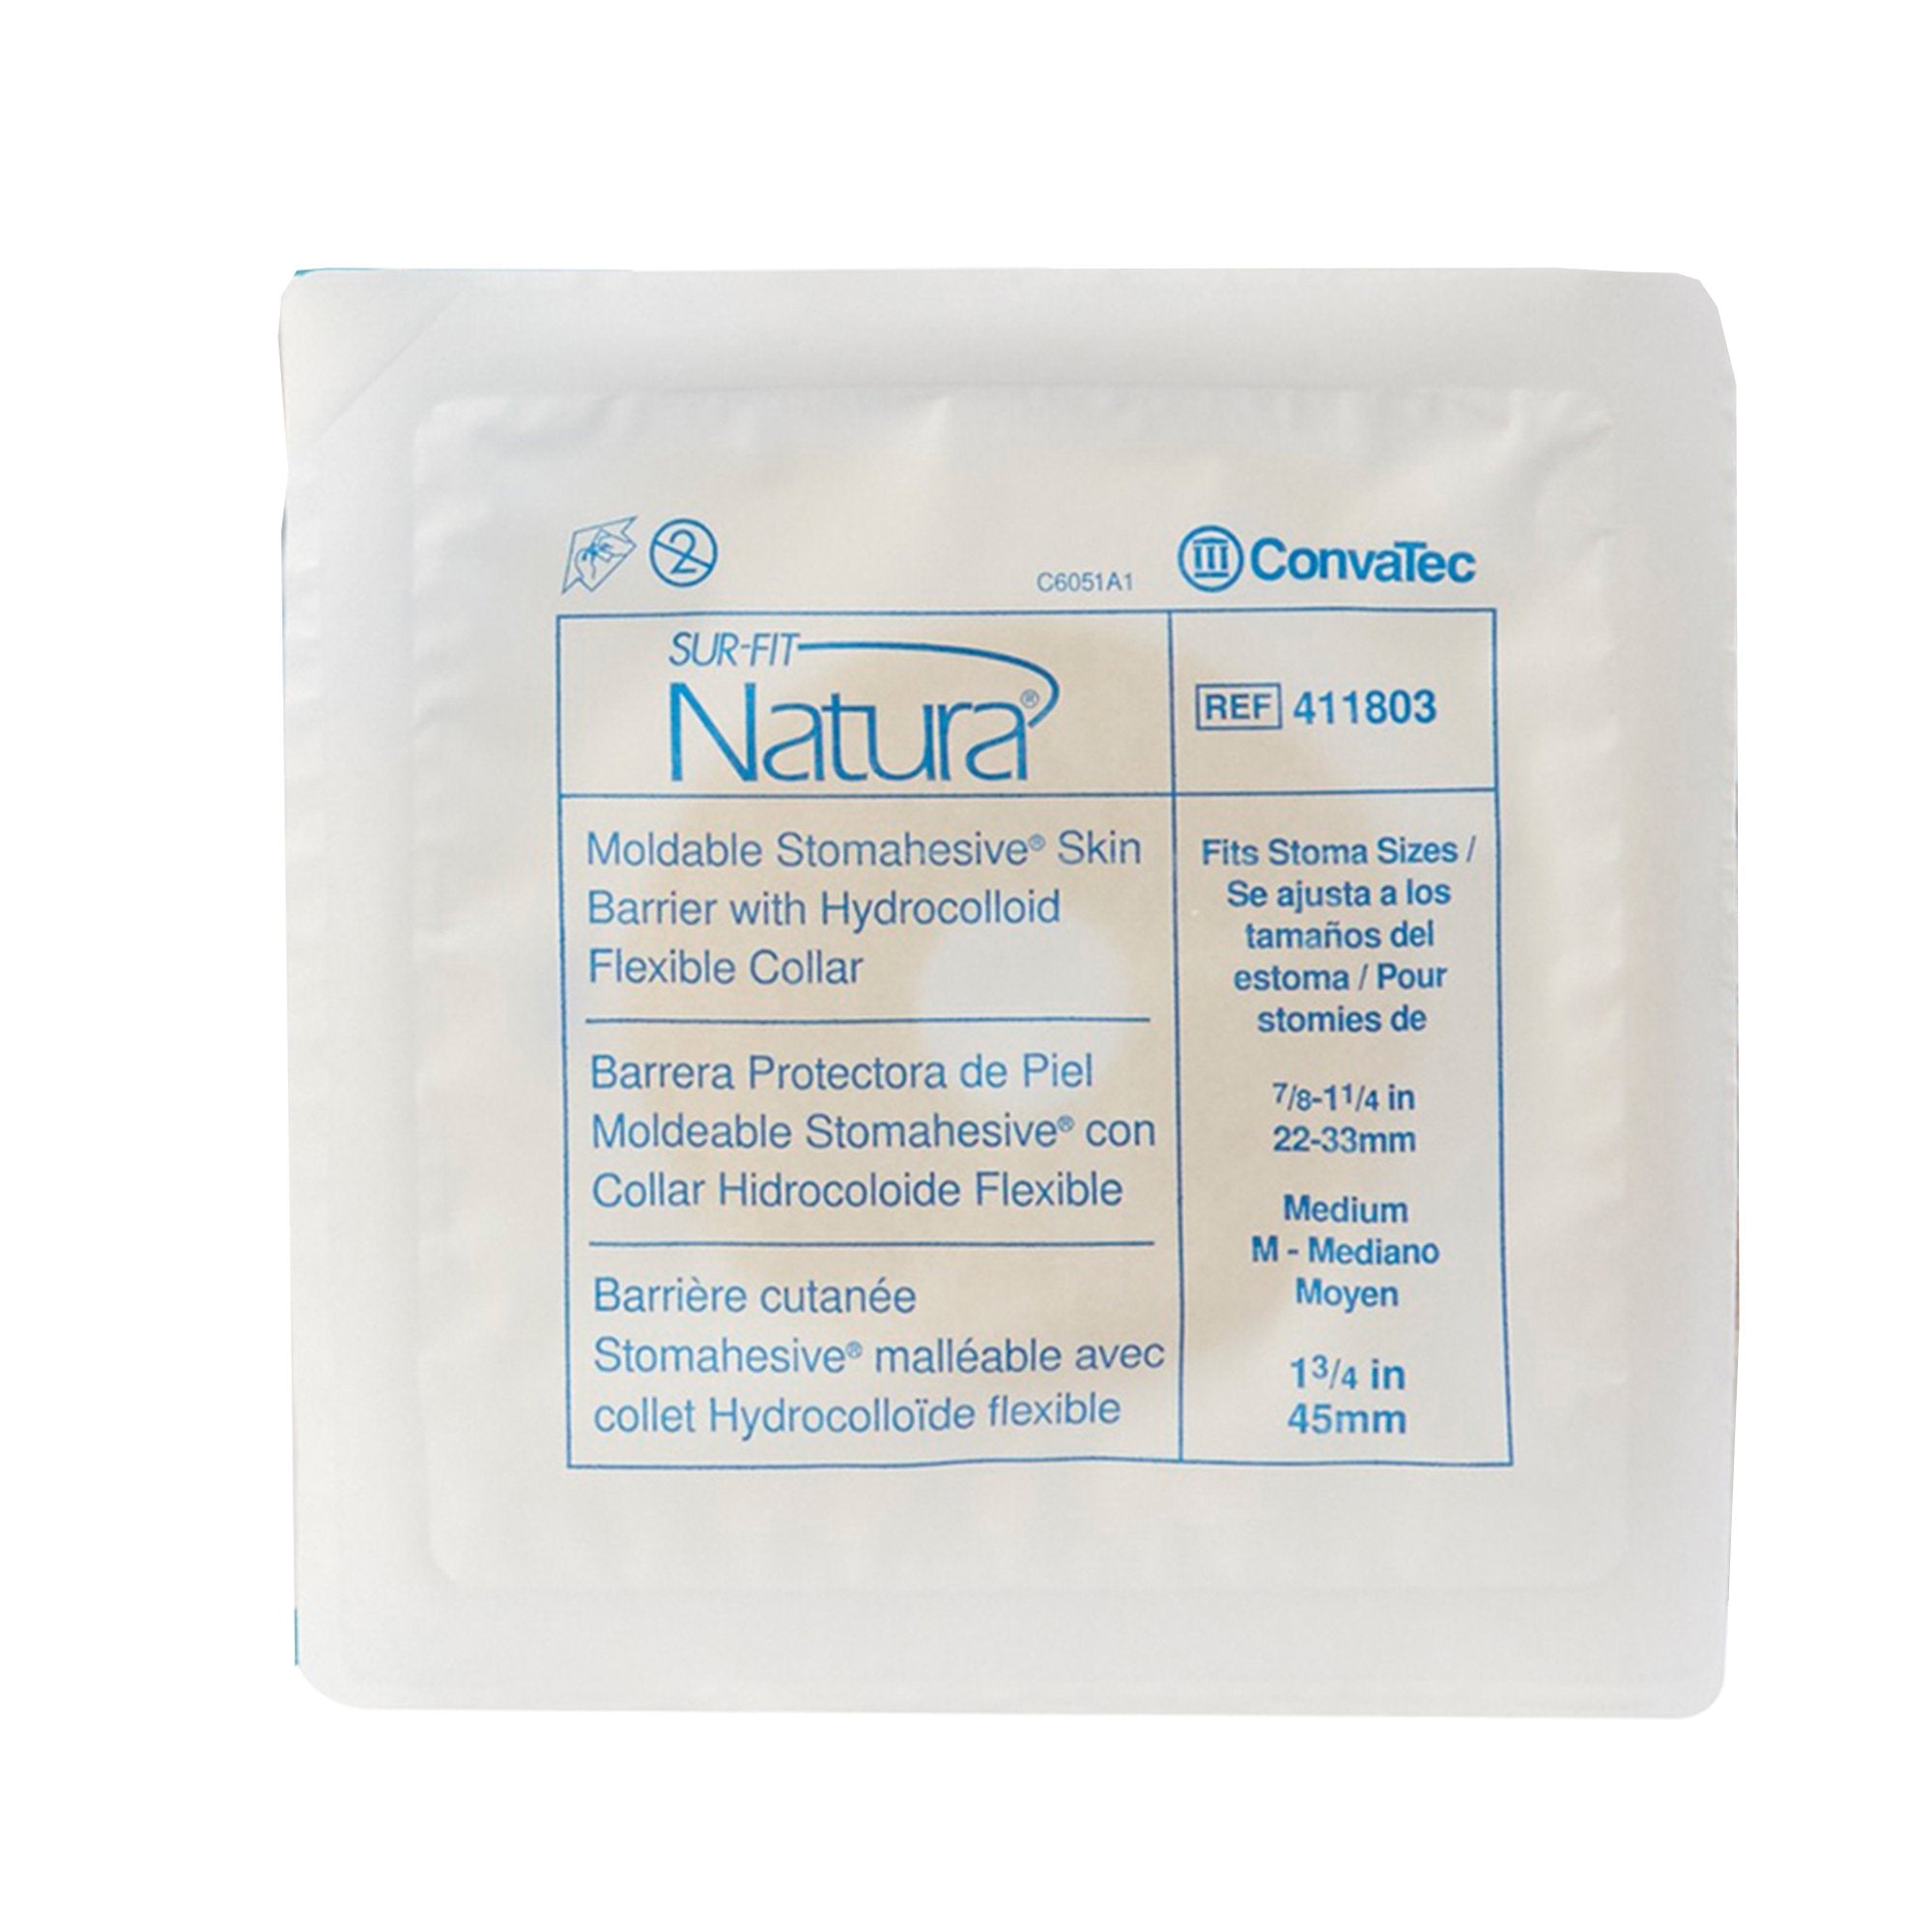 Ostomy Barrier Sur-Fit Natura Stomahesive Moldable, Standard Wear Without Tape 45 mm Flange SUR-FIT Natura System Hydrocolloid 7/8 to 1-1/4 Inch Opening